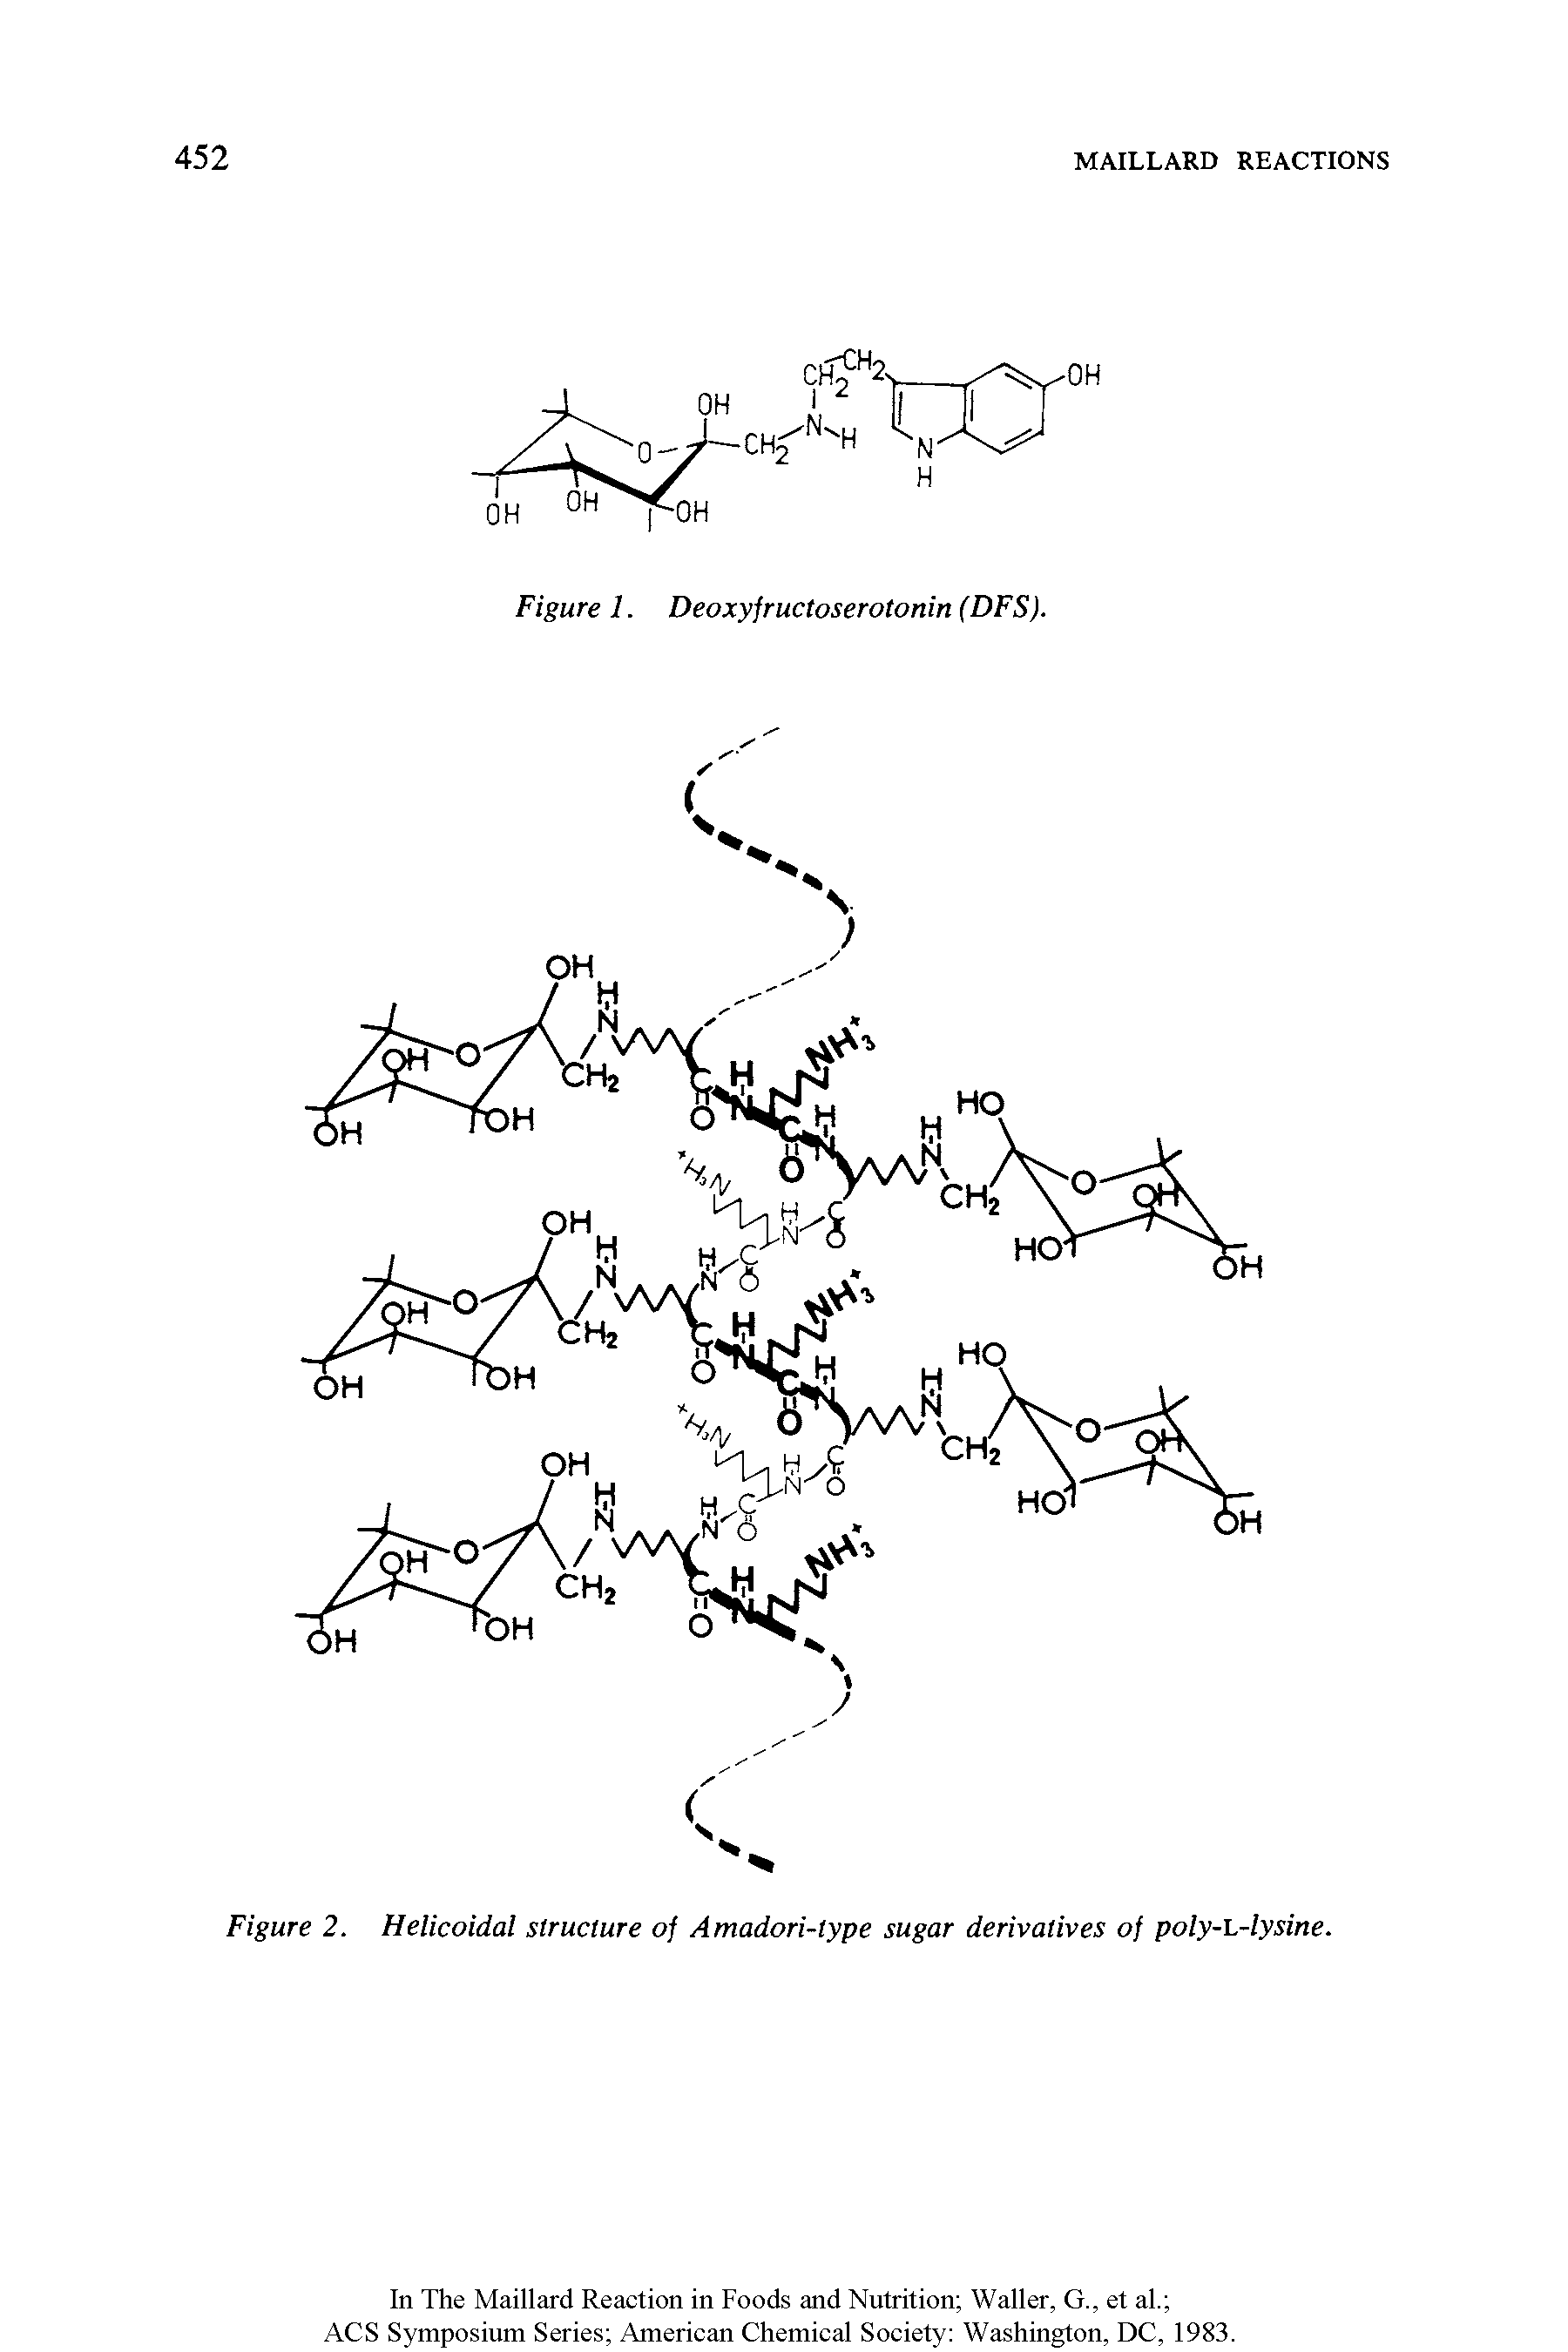 Figure 2. Helicoidal structure of Amadori-lype sugar derivatives of poly-L-lysine.